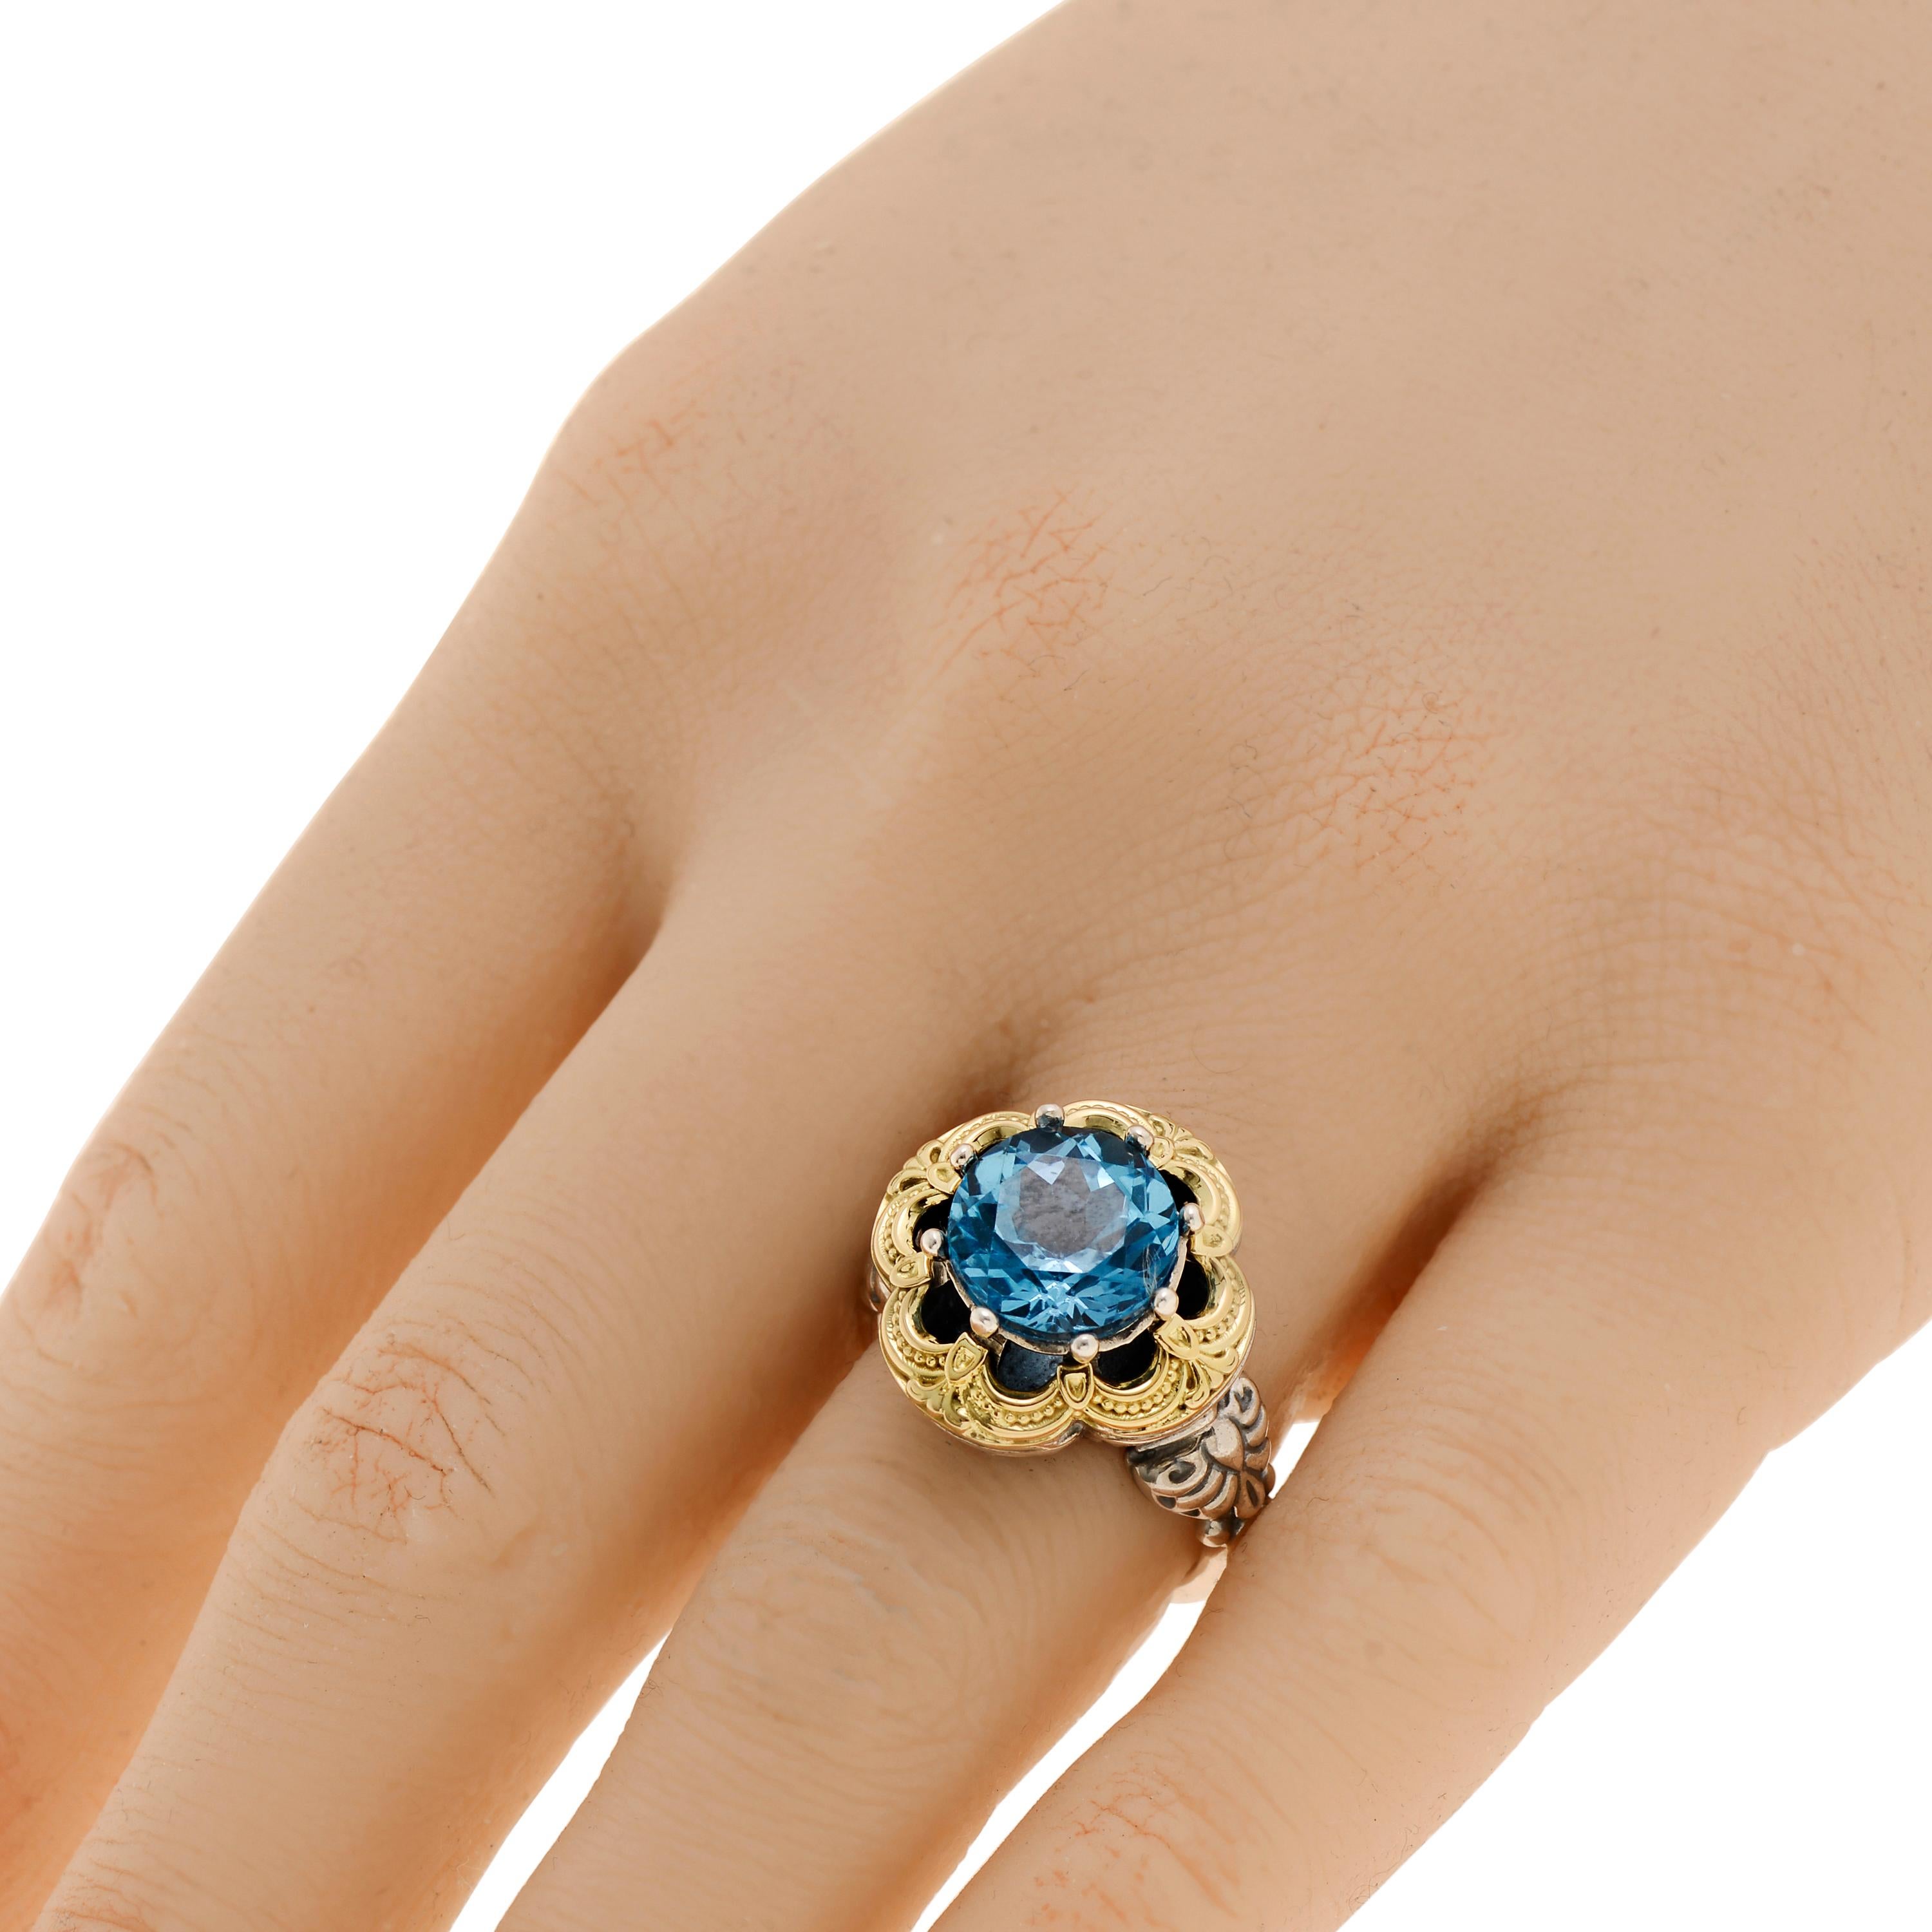 This beautiful Konstantino ring features blue topaz set in sterling silver with 18K yellow gold accents. The decoration size is 3/4”. The weight is 11g. The ring size is 7 (54.4).
